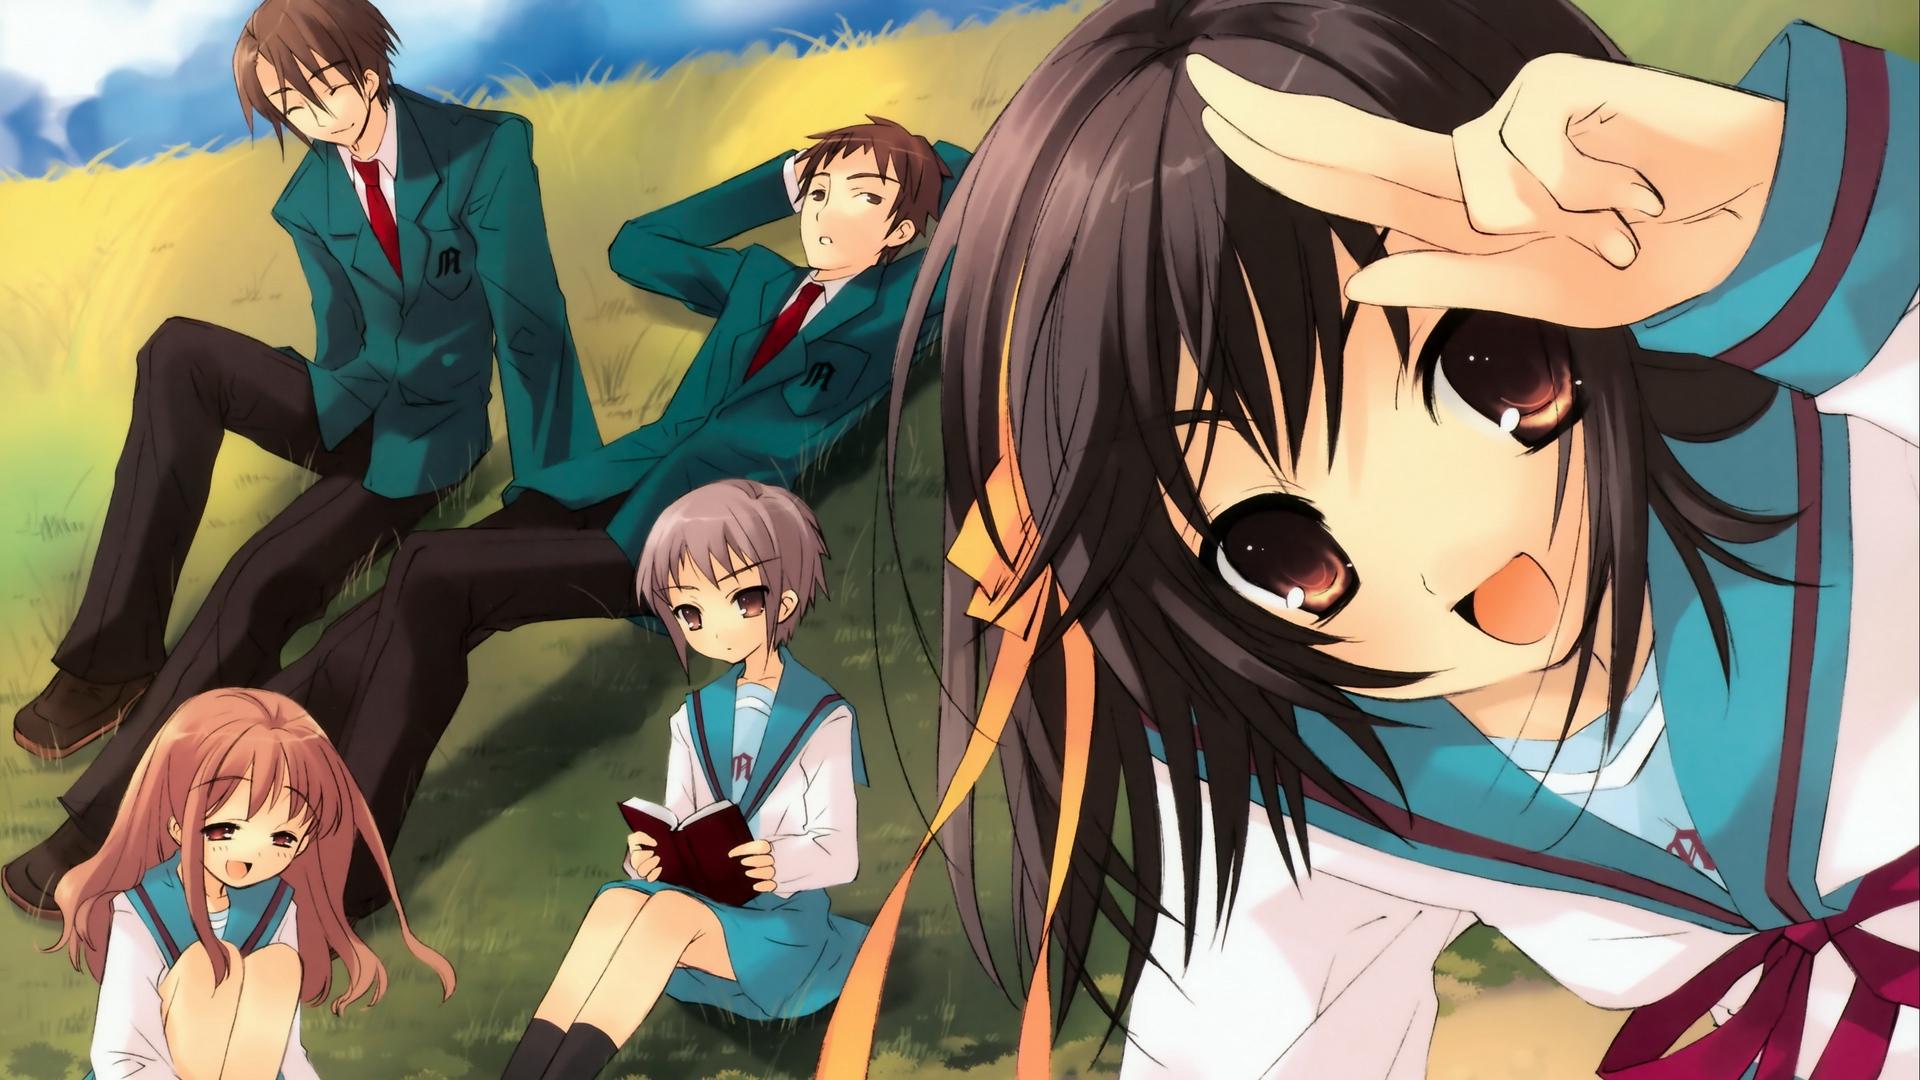 Download wallpaper 1920x1080 anime, students, meadow